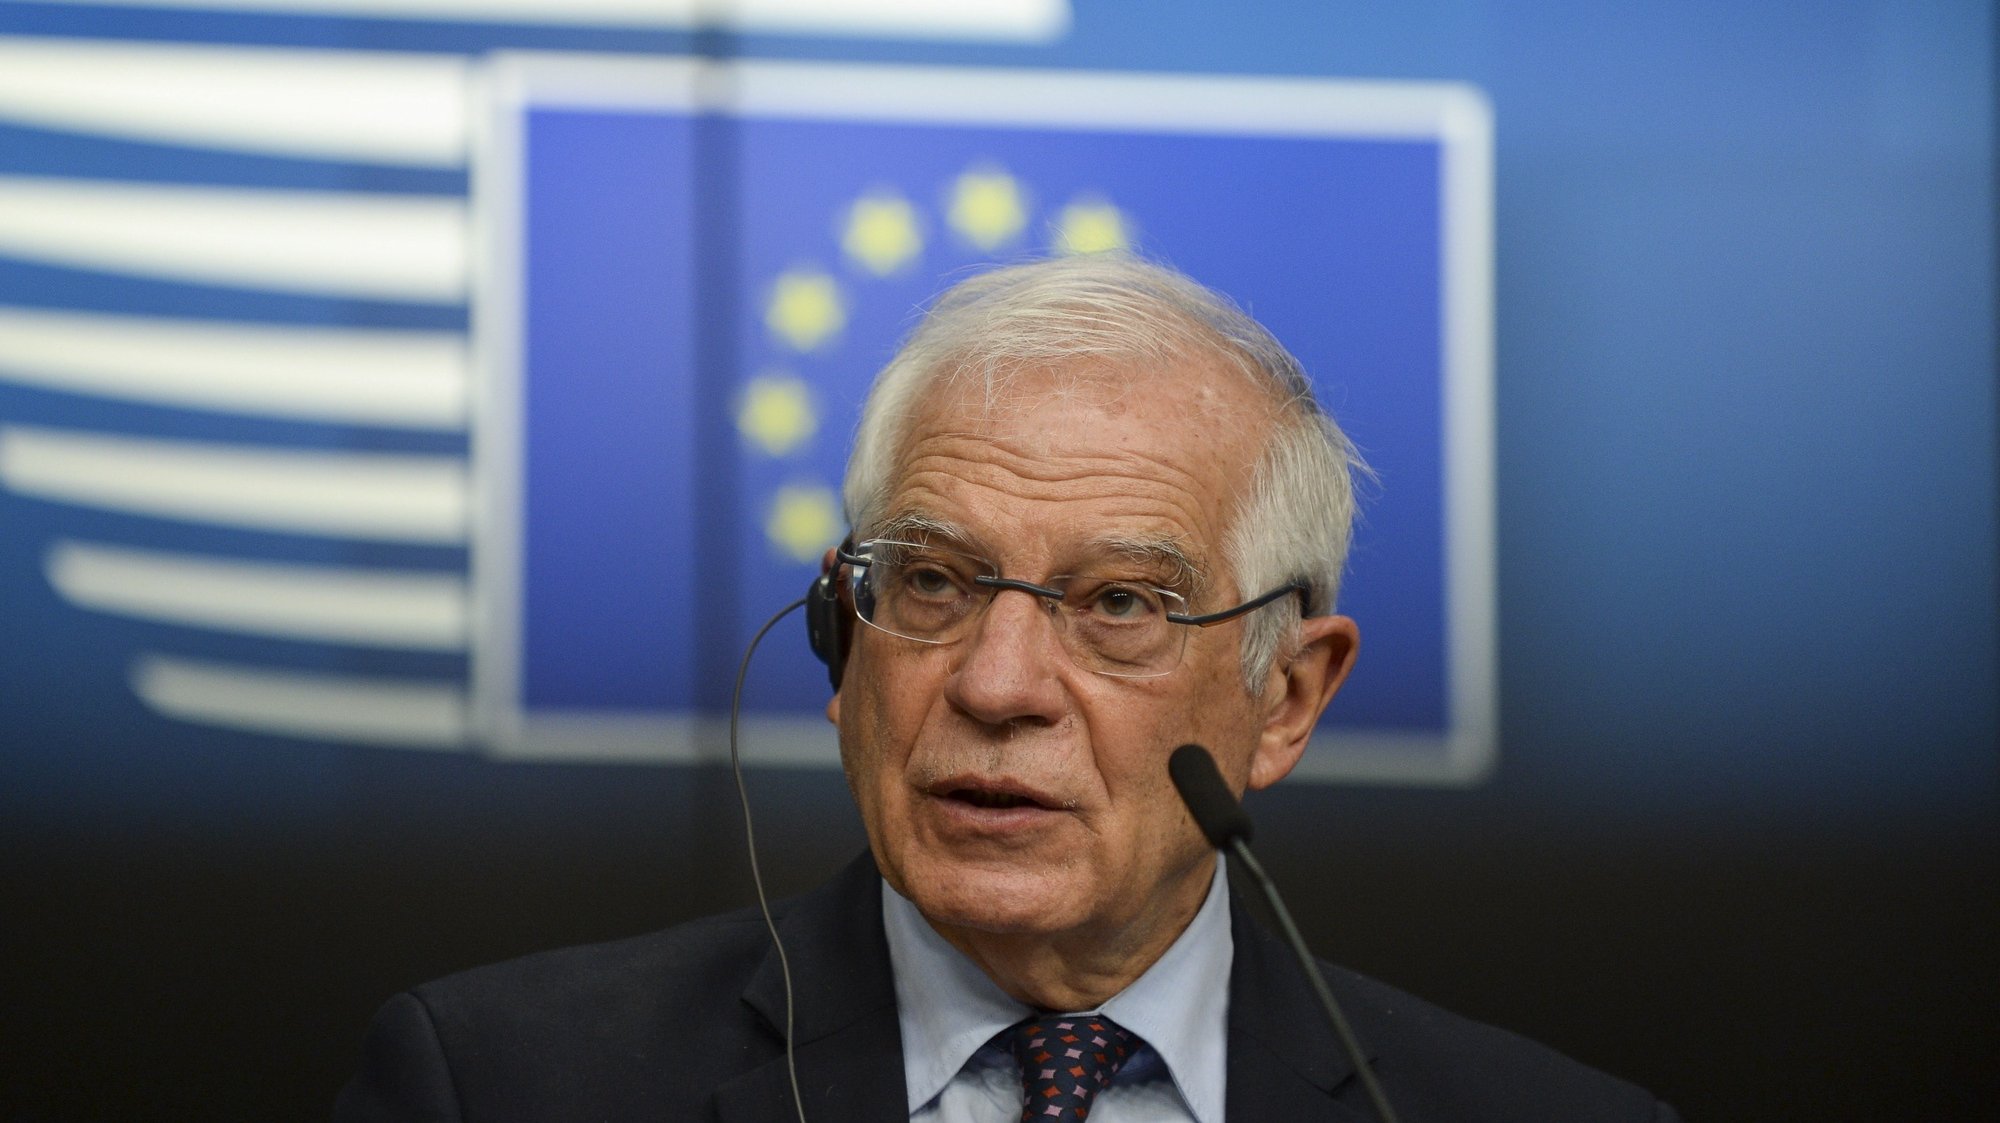 epa09029979 European Union High Representative for Foreign Affairs and Security Policy Josep Borrell speaks at a news conference after an EU Foreign Ministers meeting in Brussels, Belgium, 22 February 2021.  EPA/JOHANNA GERON / POOL